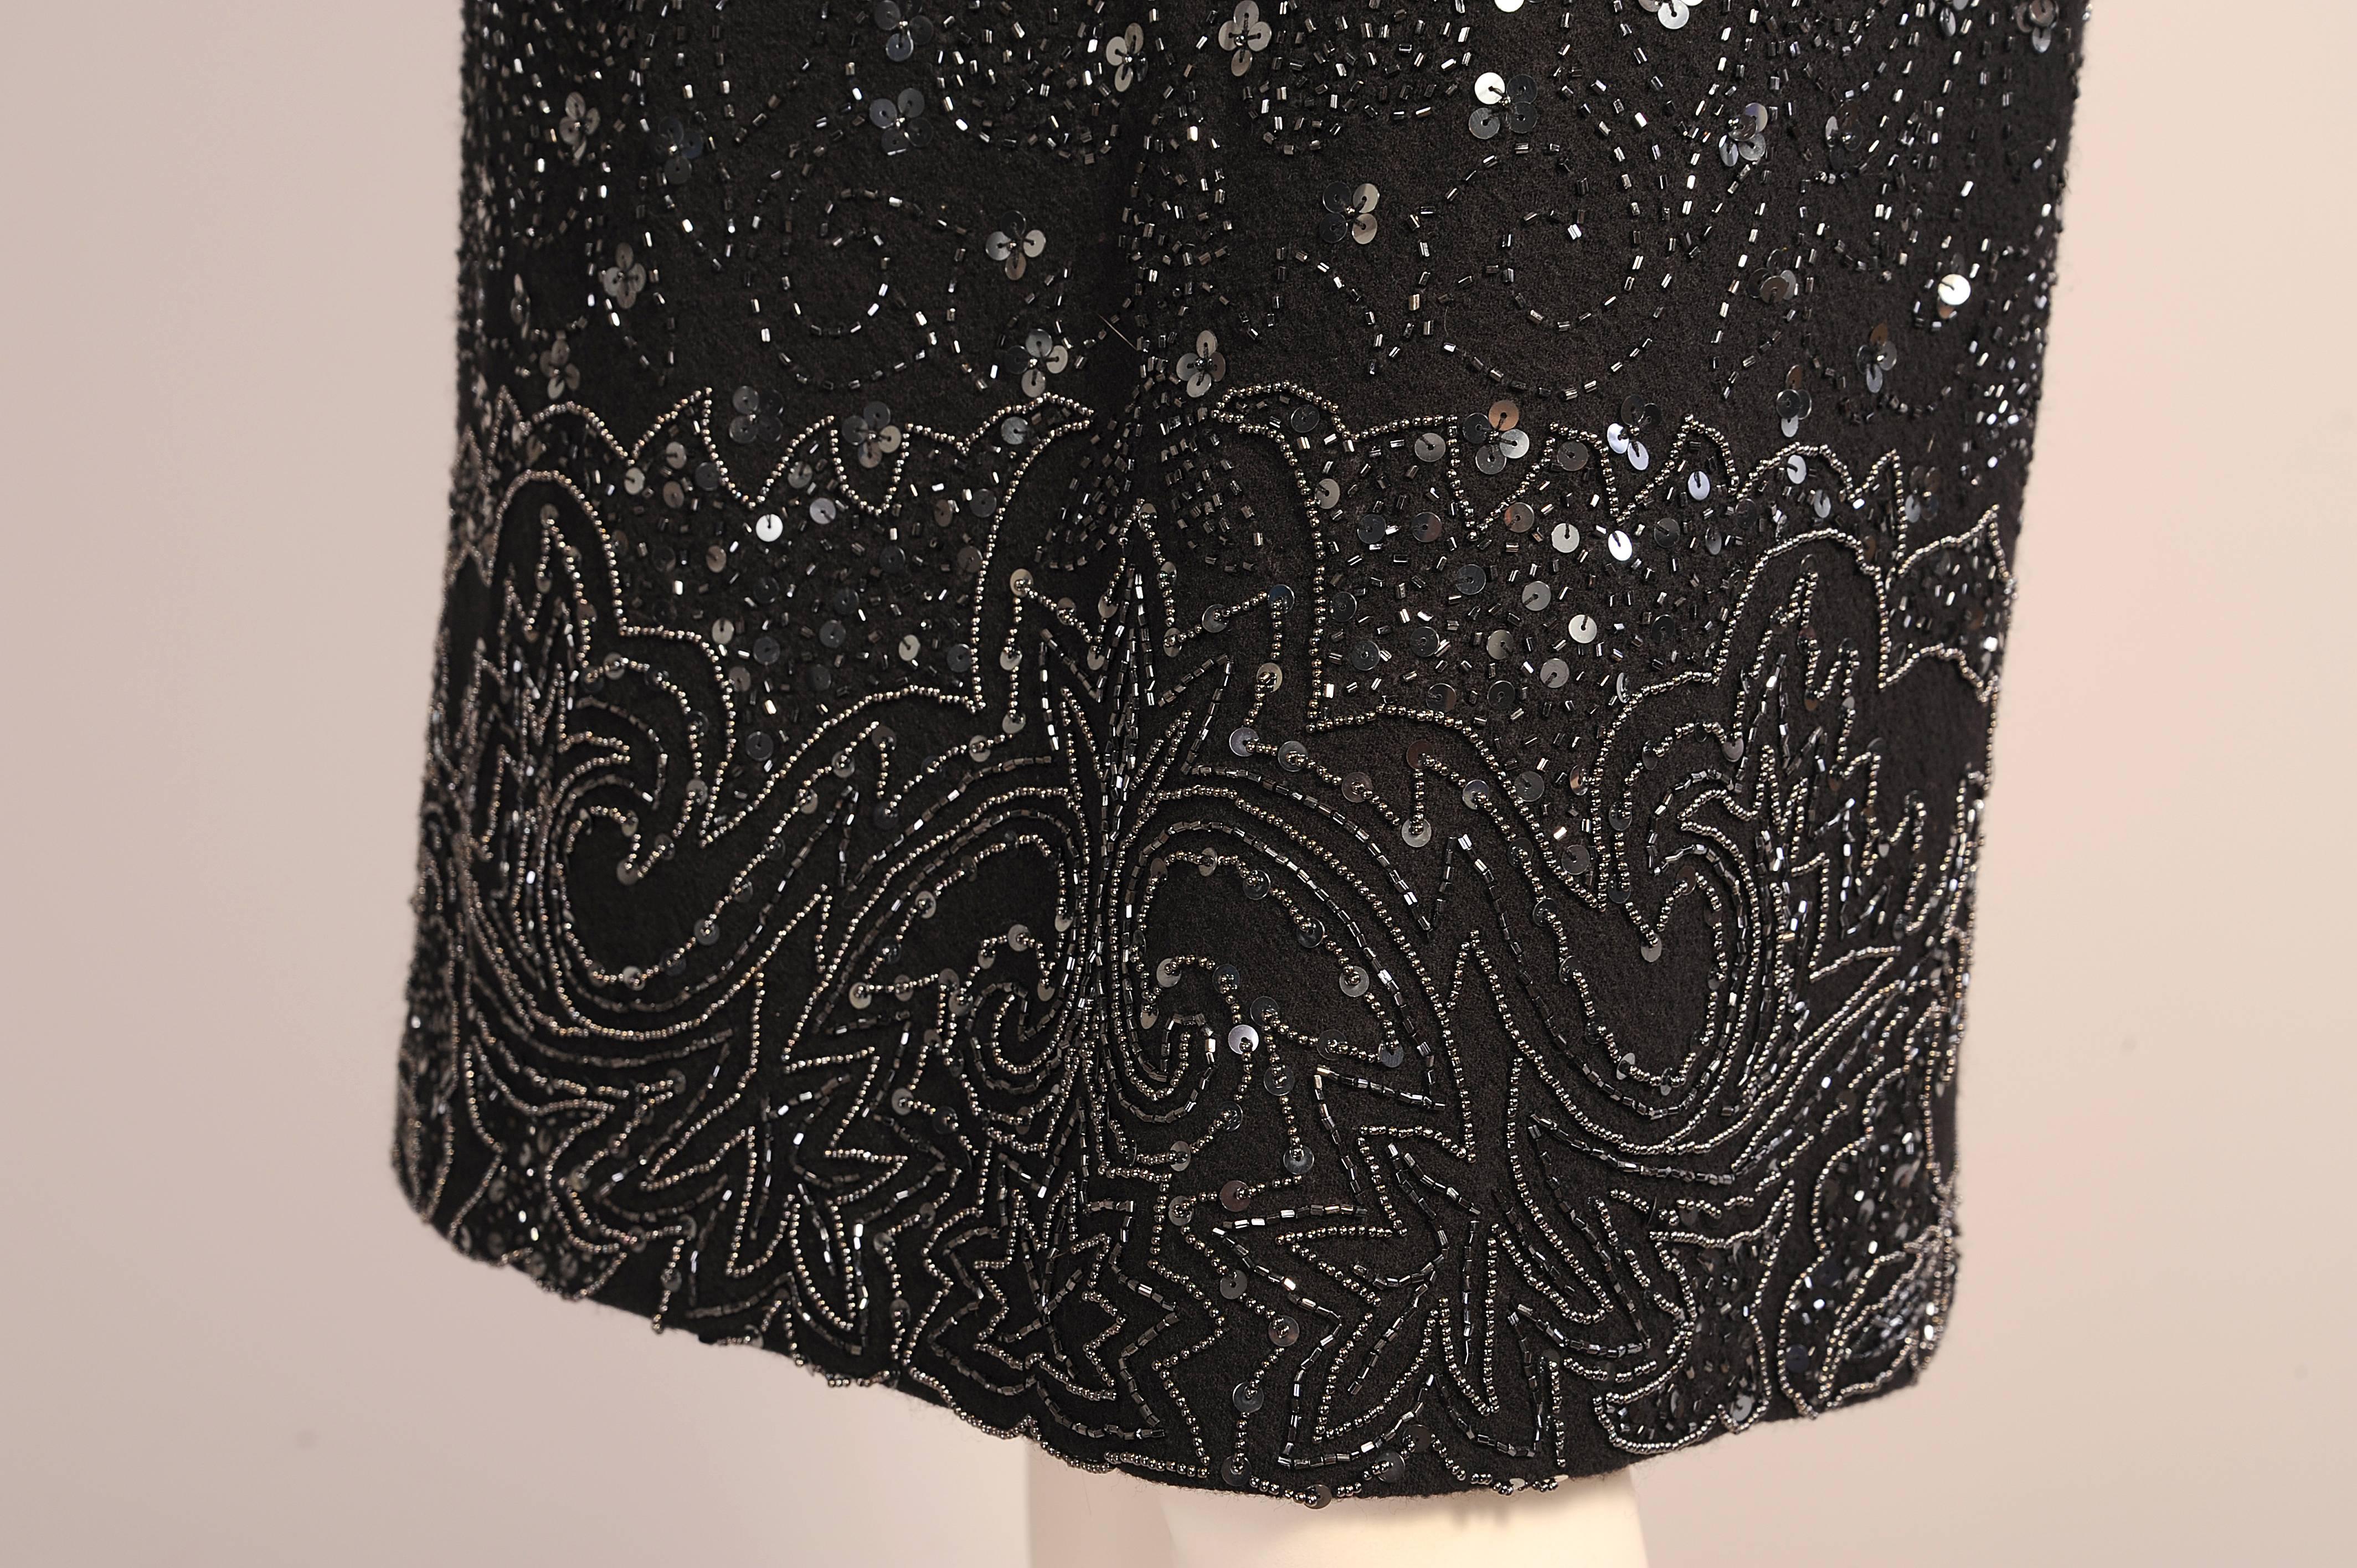 This slim skirt is completely beaded with black bugle beads in an abstract vine design. This is accentuated with clusters of black sequins. The border design incorporates caviar beads outlining the the stylized leaf and vine pattern. The skirt is